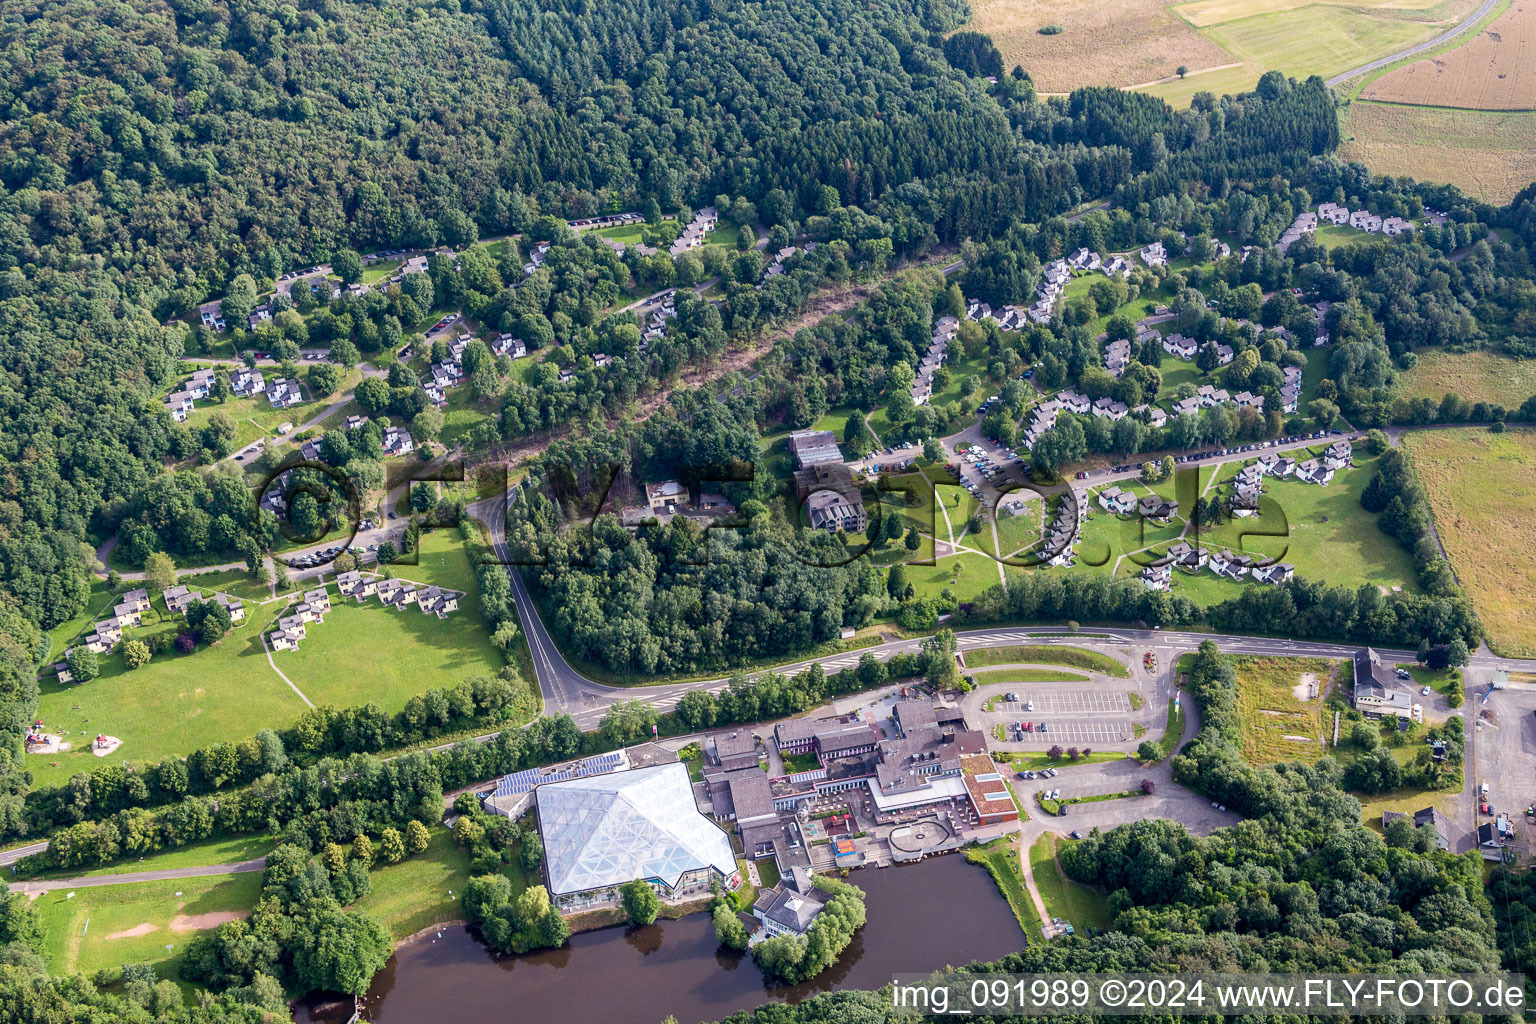 Aerial photograpy of Holiday house plant of the park Ferienpark Hambachtal in Oberhambach in the state Rhineland-Palatinate, Germany